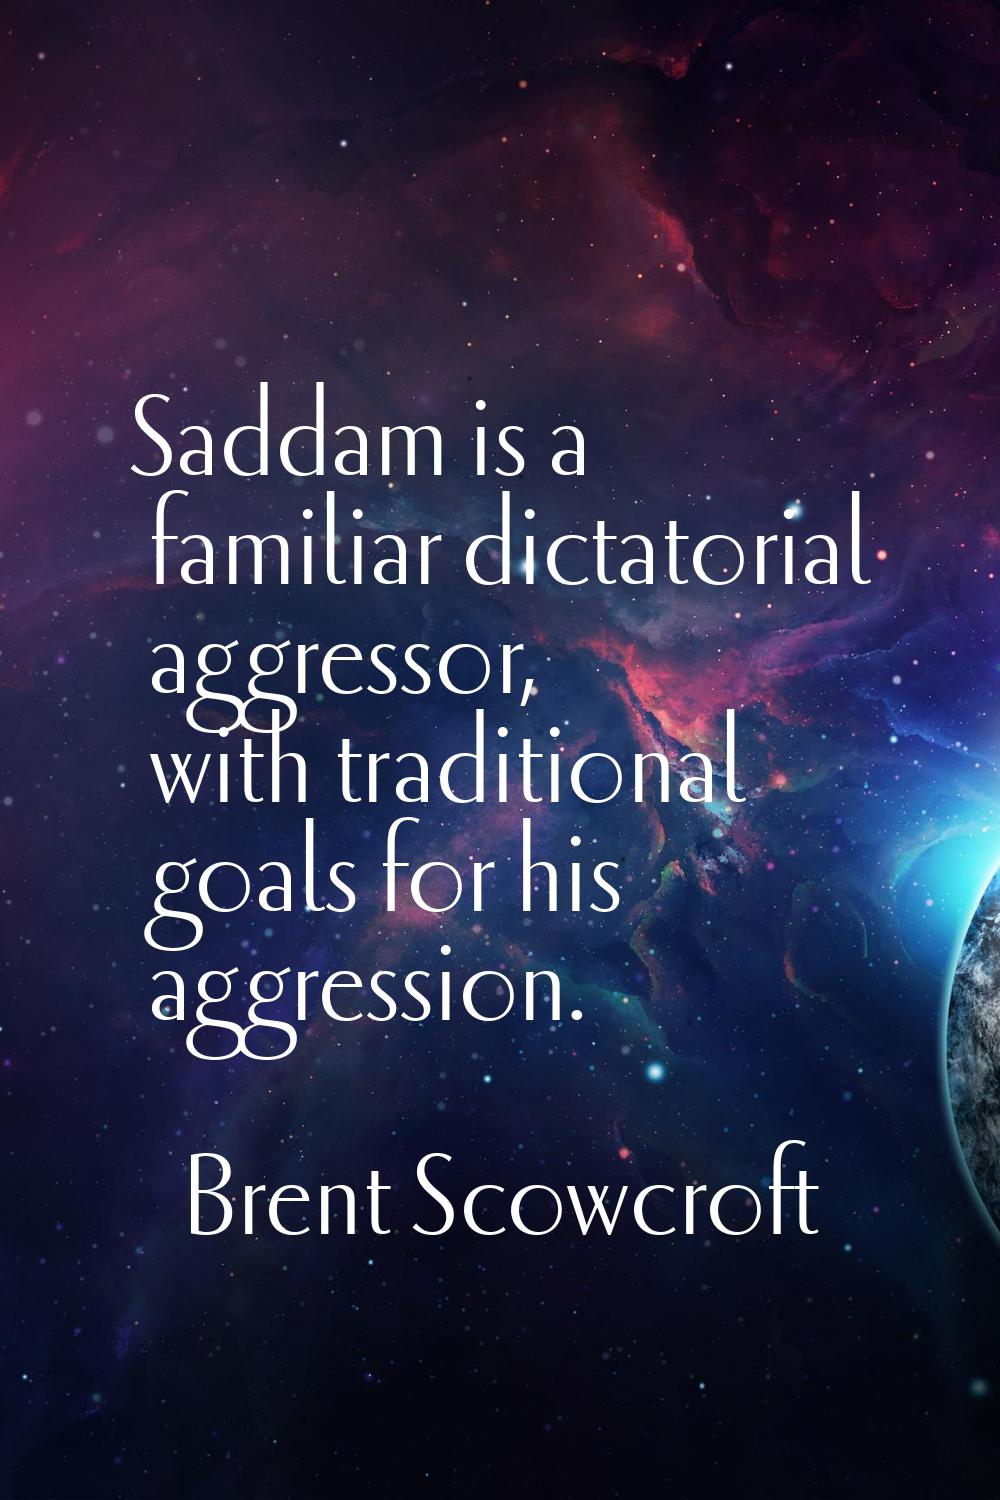 Saddam is a familiar dictatorial aggressor, with traditional goals for his aggression.